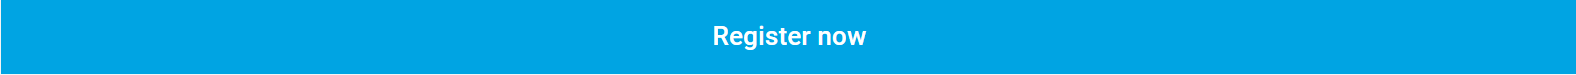 Register to attend the Energy EMEA Summit 